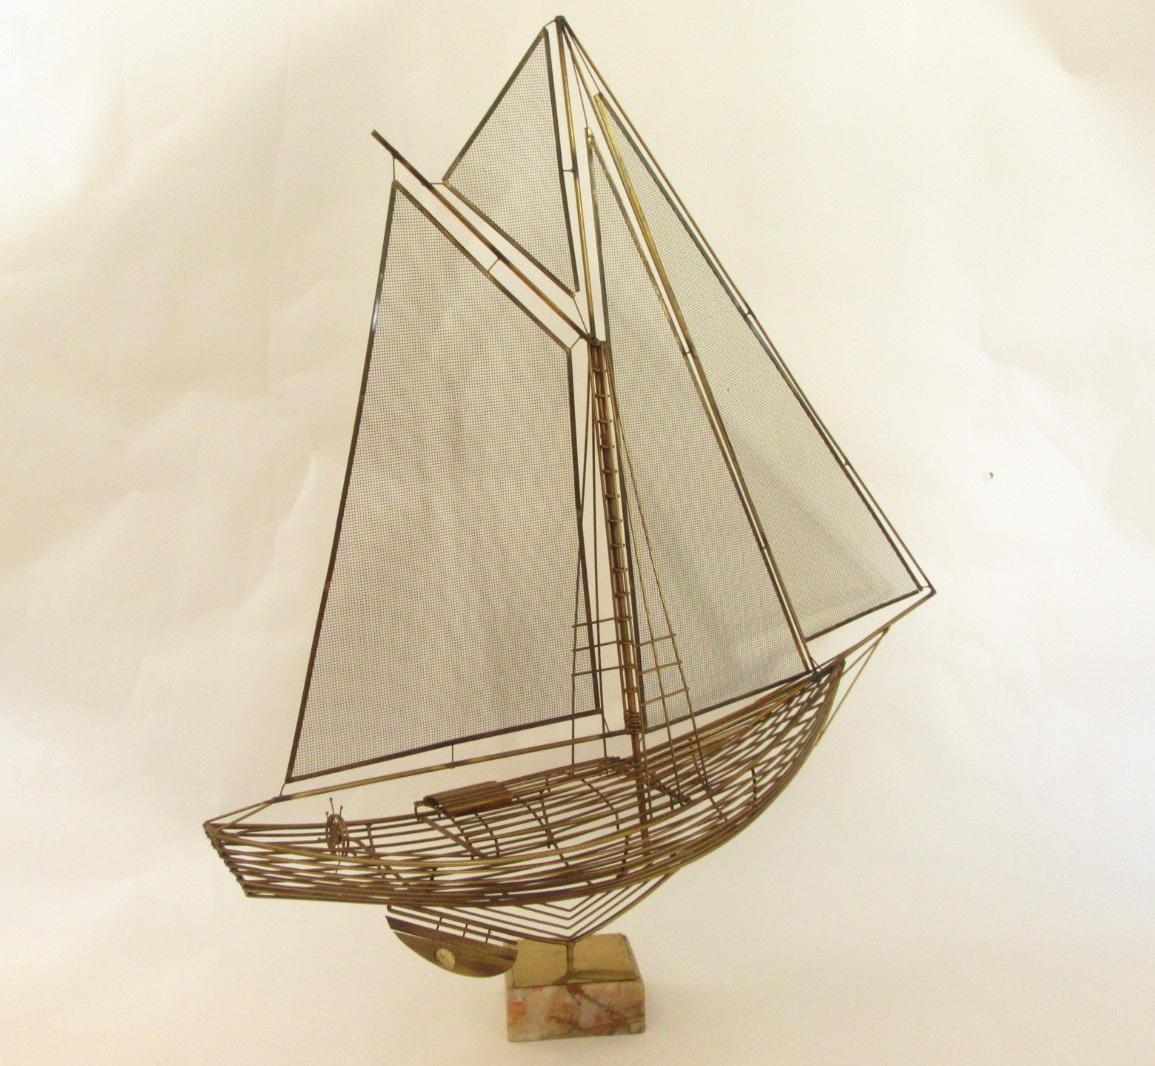 Brass sailboat sculpture on a detachable swivel platform.
Produced by Curtis Jere for Artisan House in San Francisco.